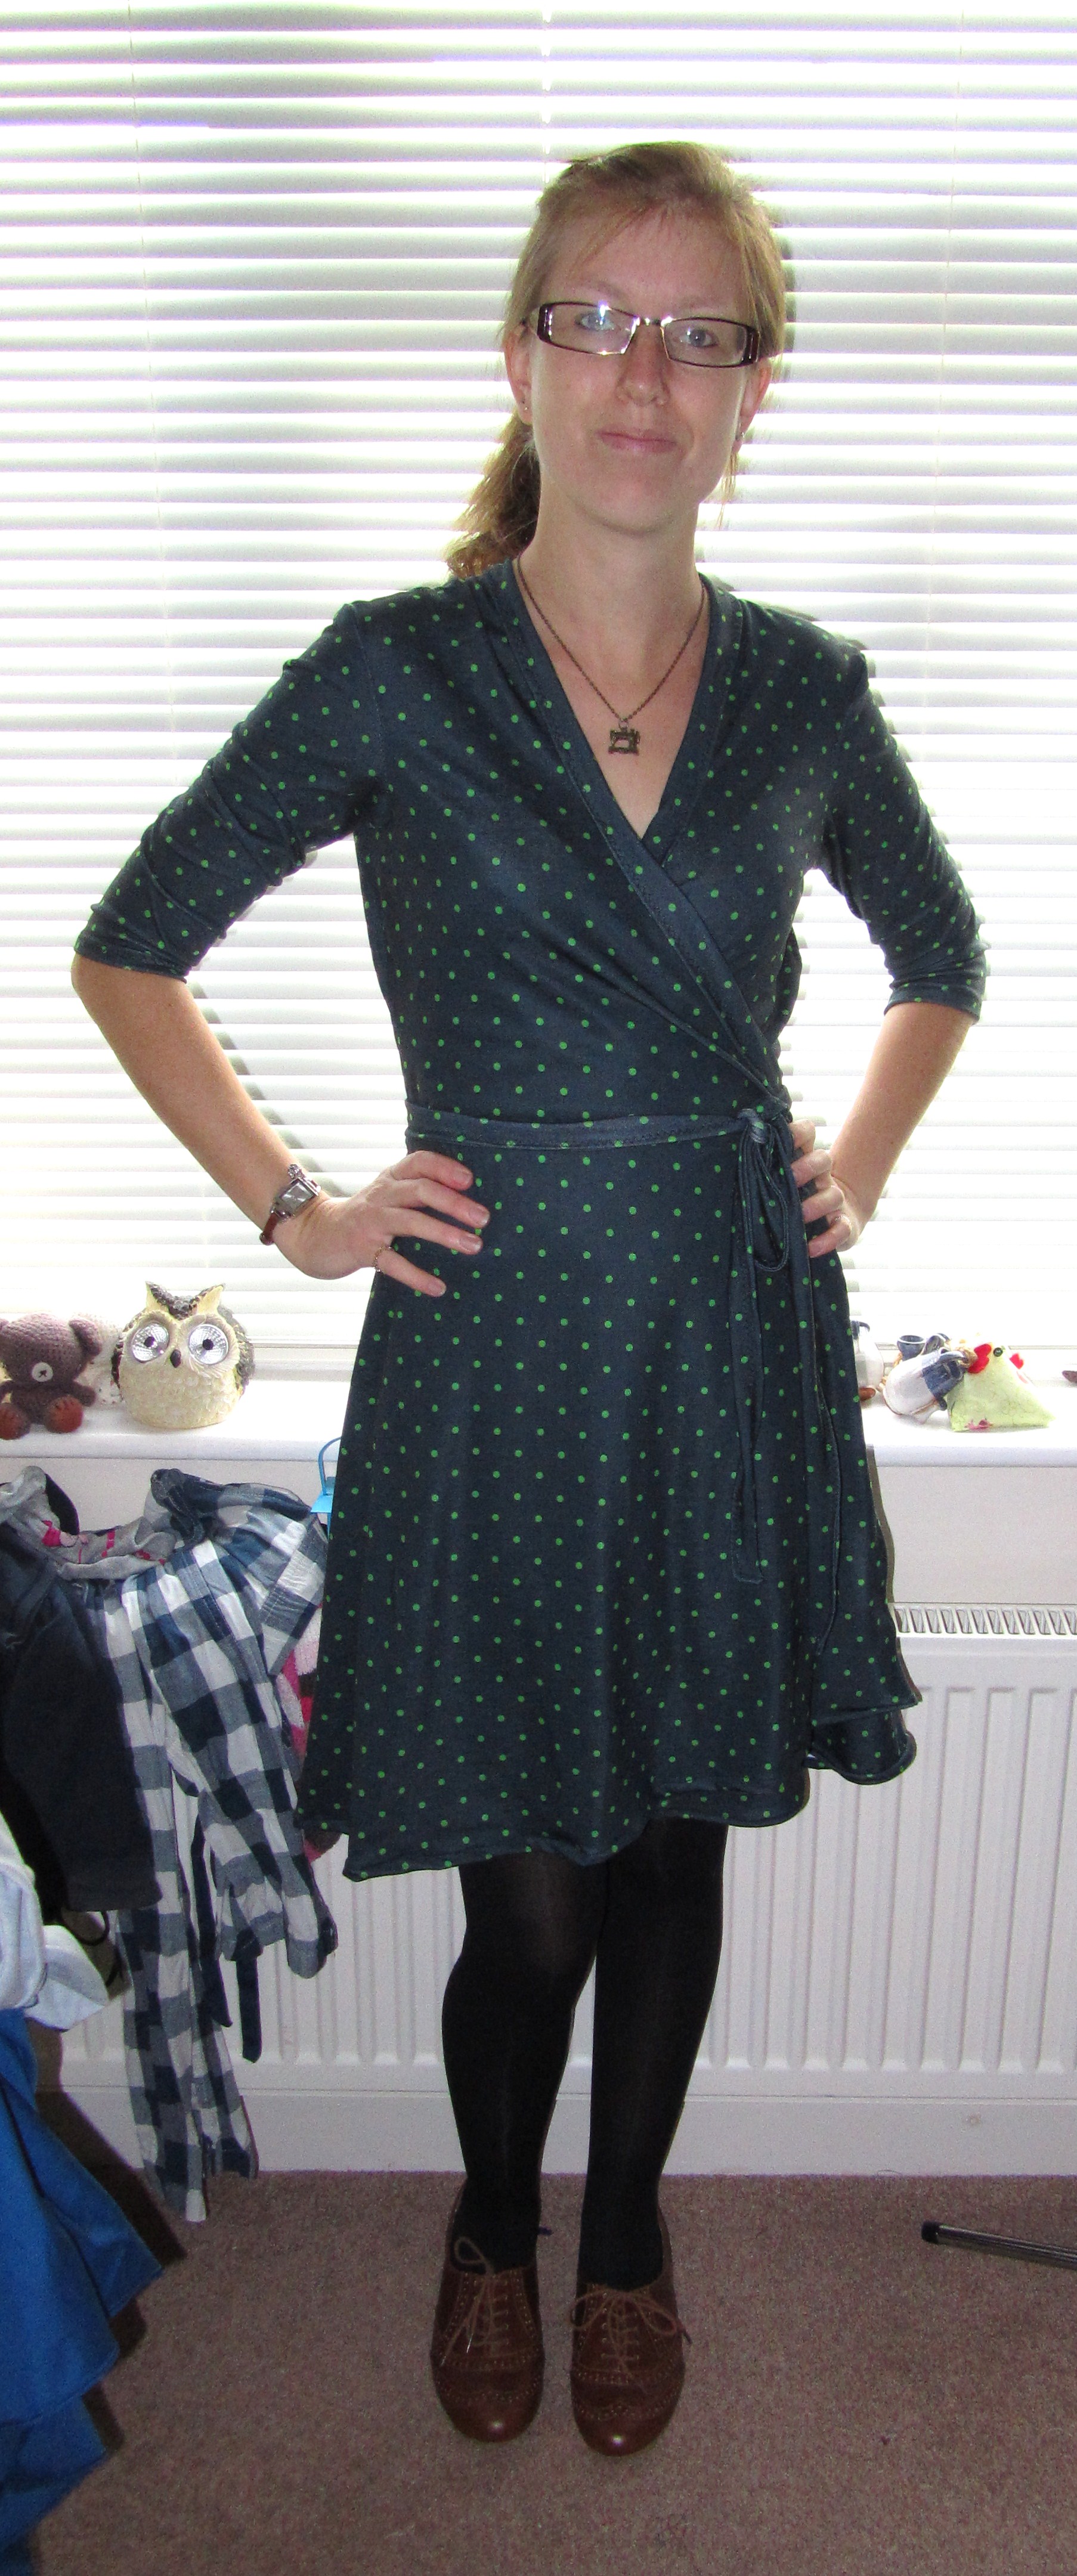 Wrap dot dress – Sewing Projects | BurdaStyle.com